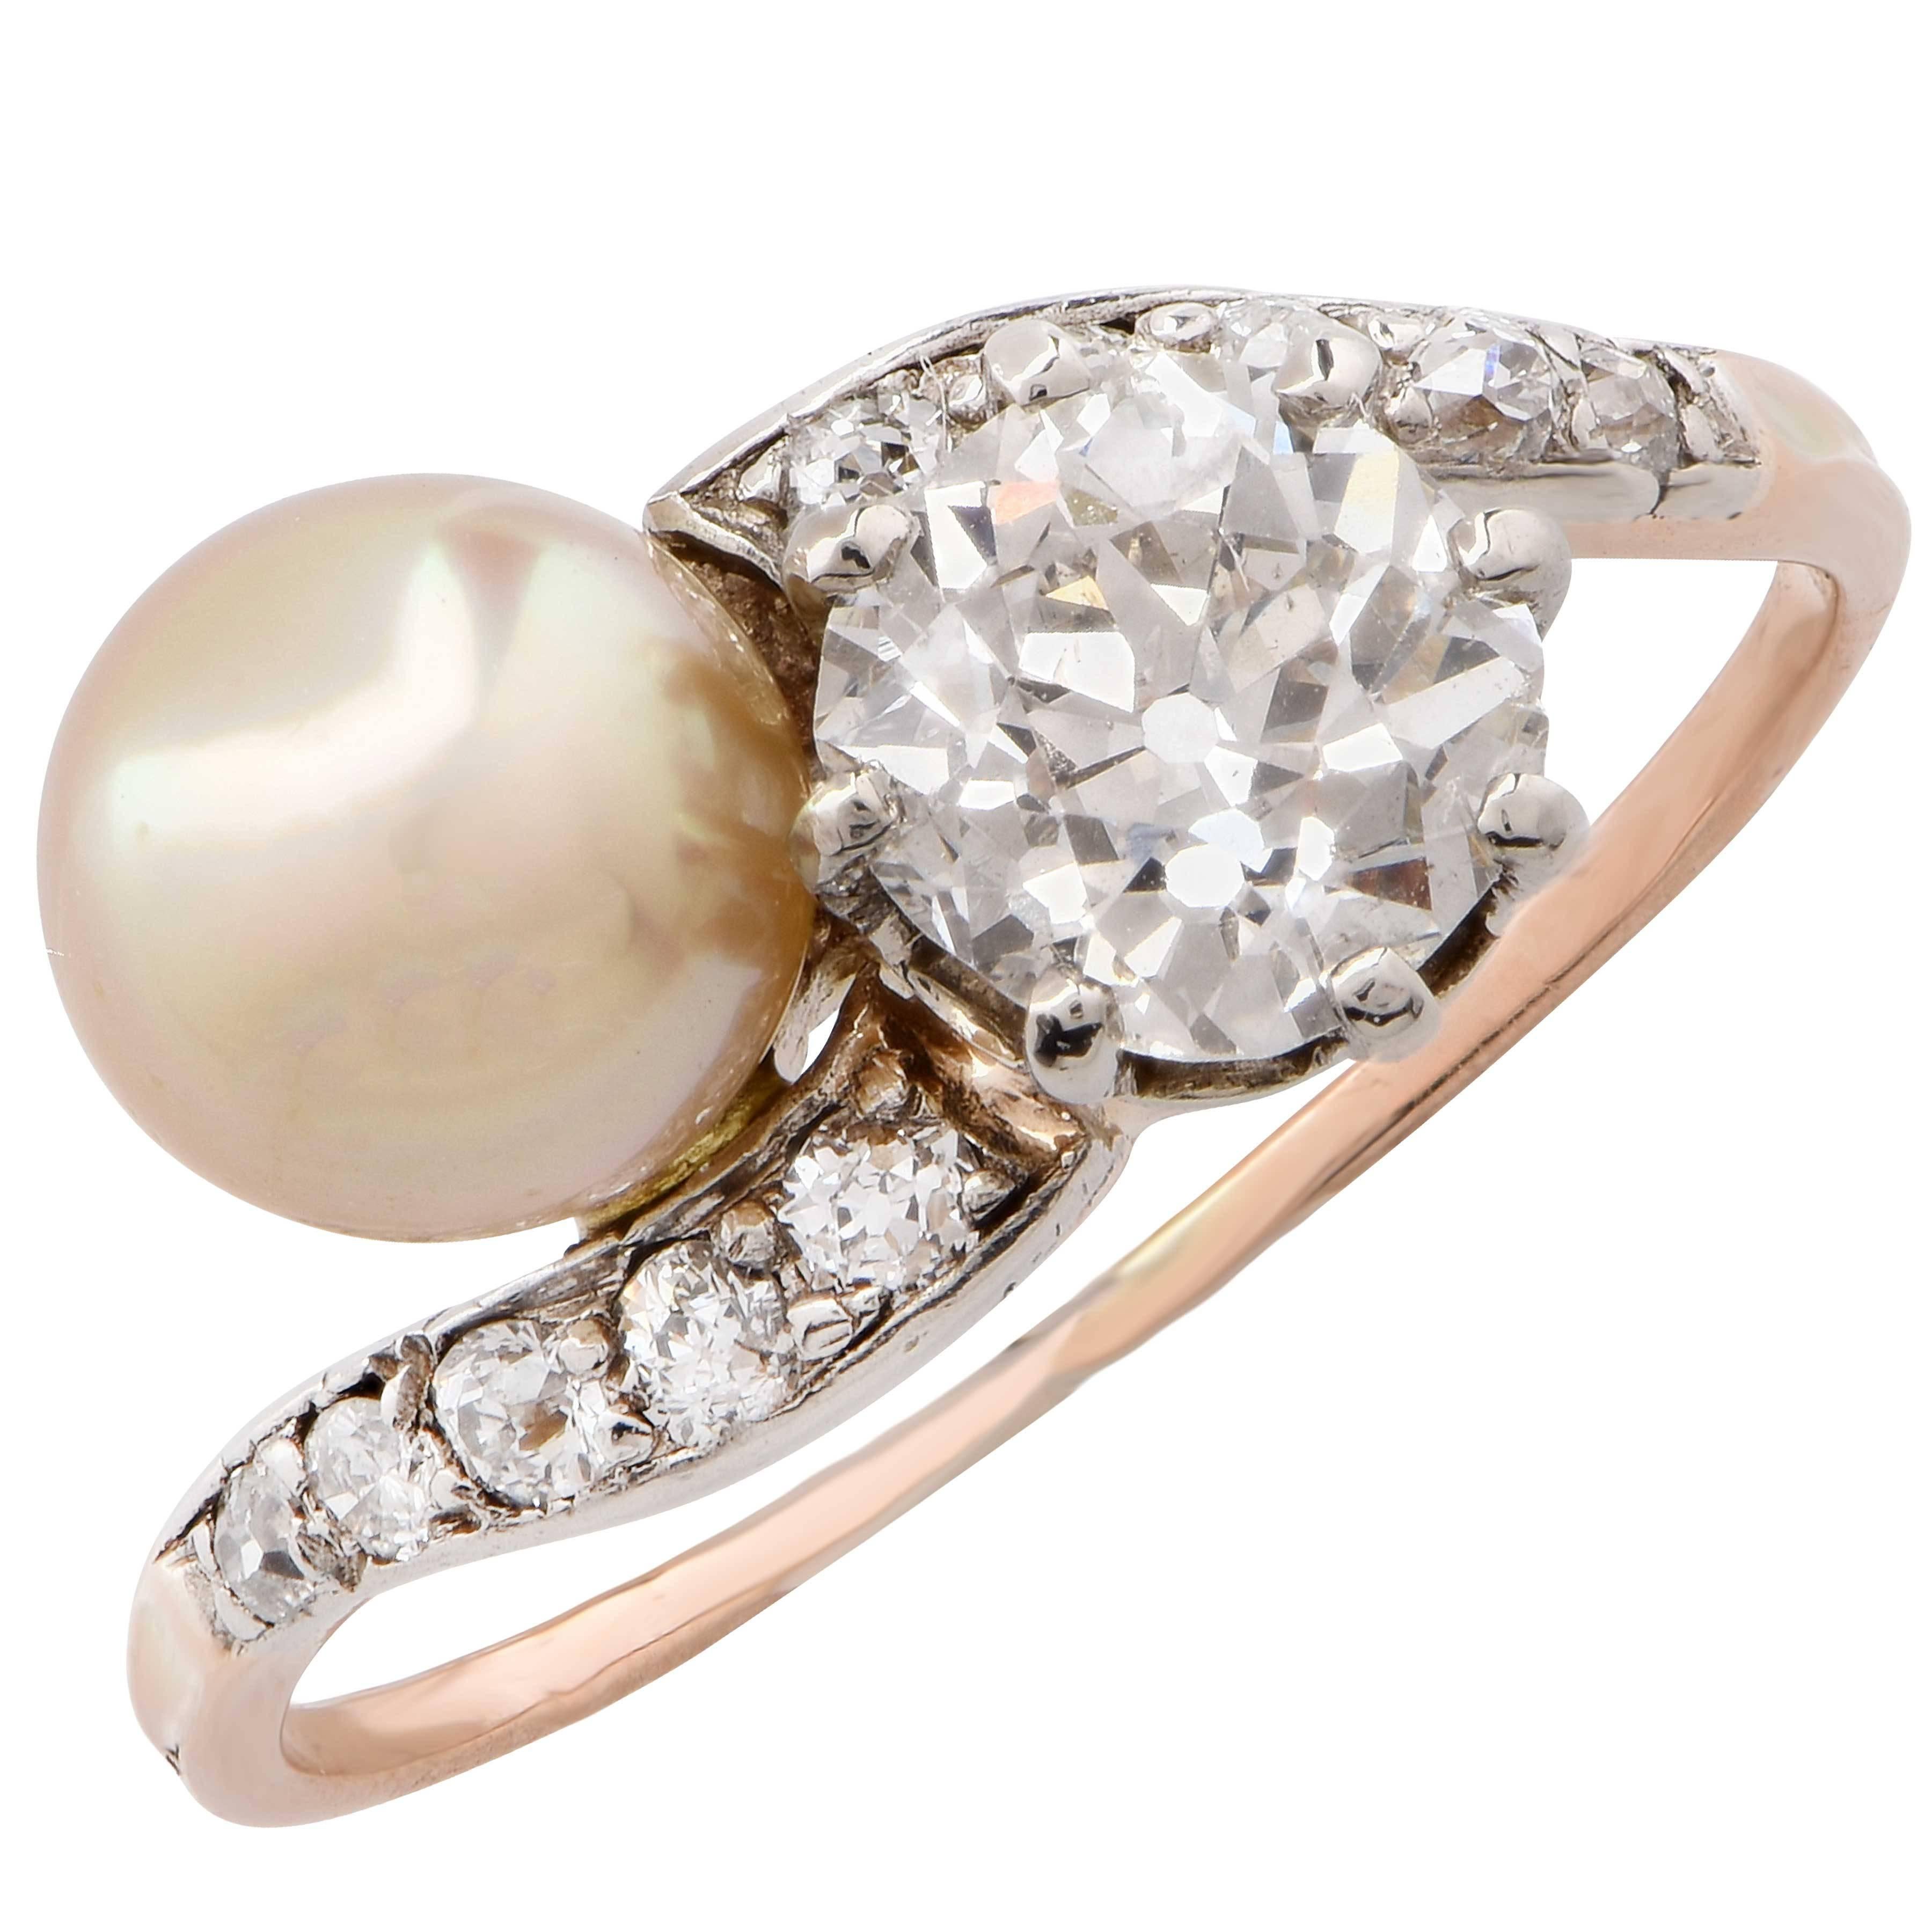 1 Carat Old Miner Cut Diamond and  Pearl Ring, circa 1880 For Sale